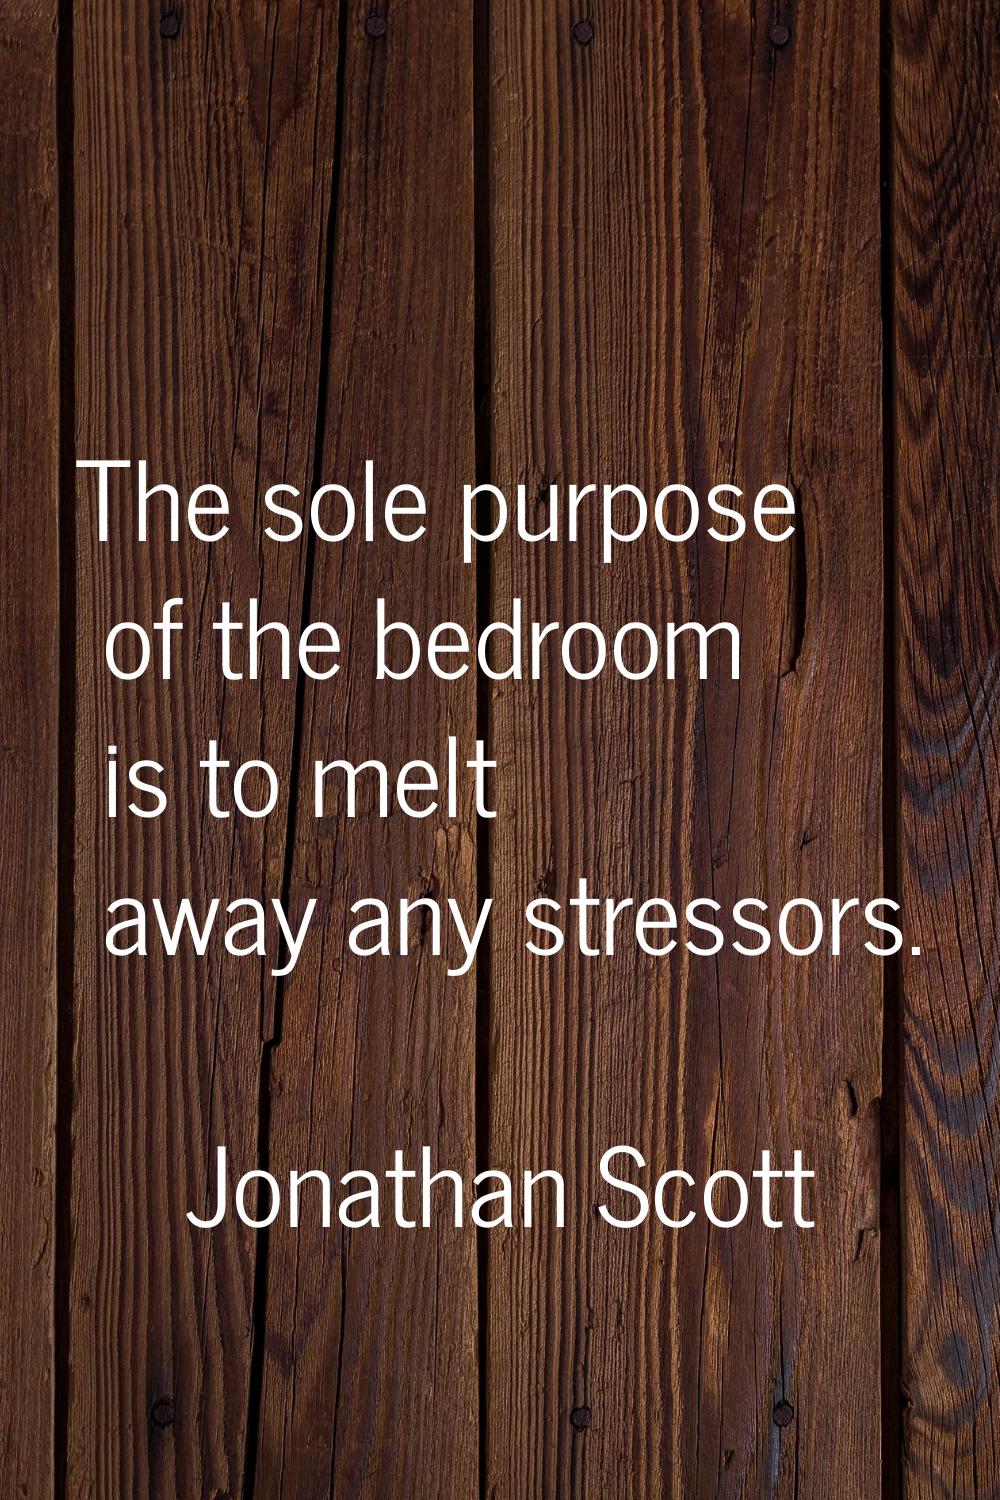 The sole purpose of the bedroom is to melt away any stressors.